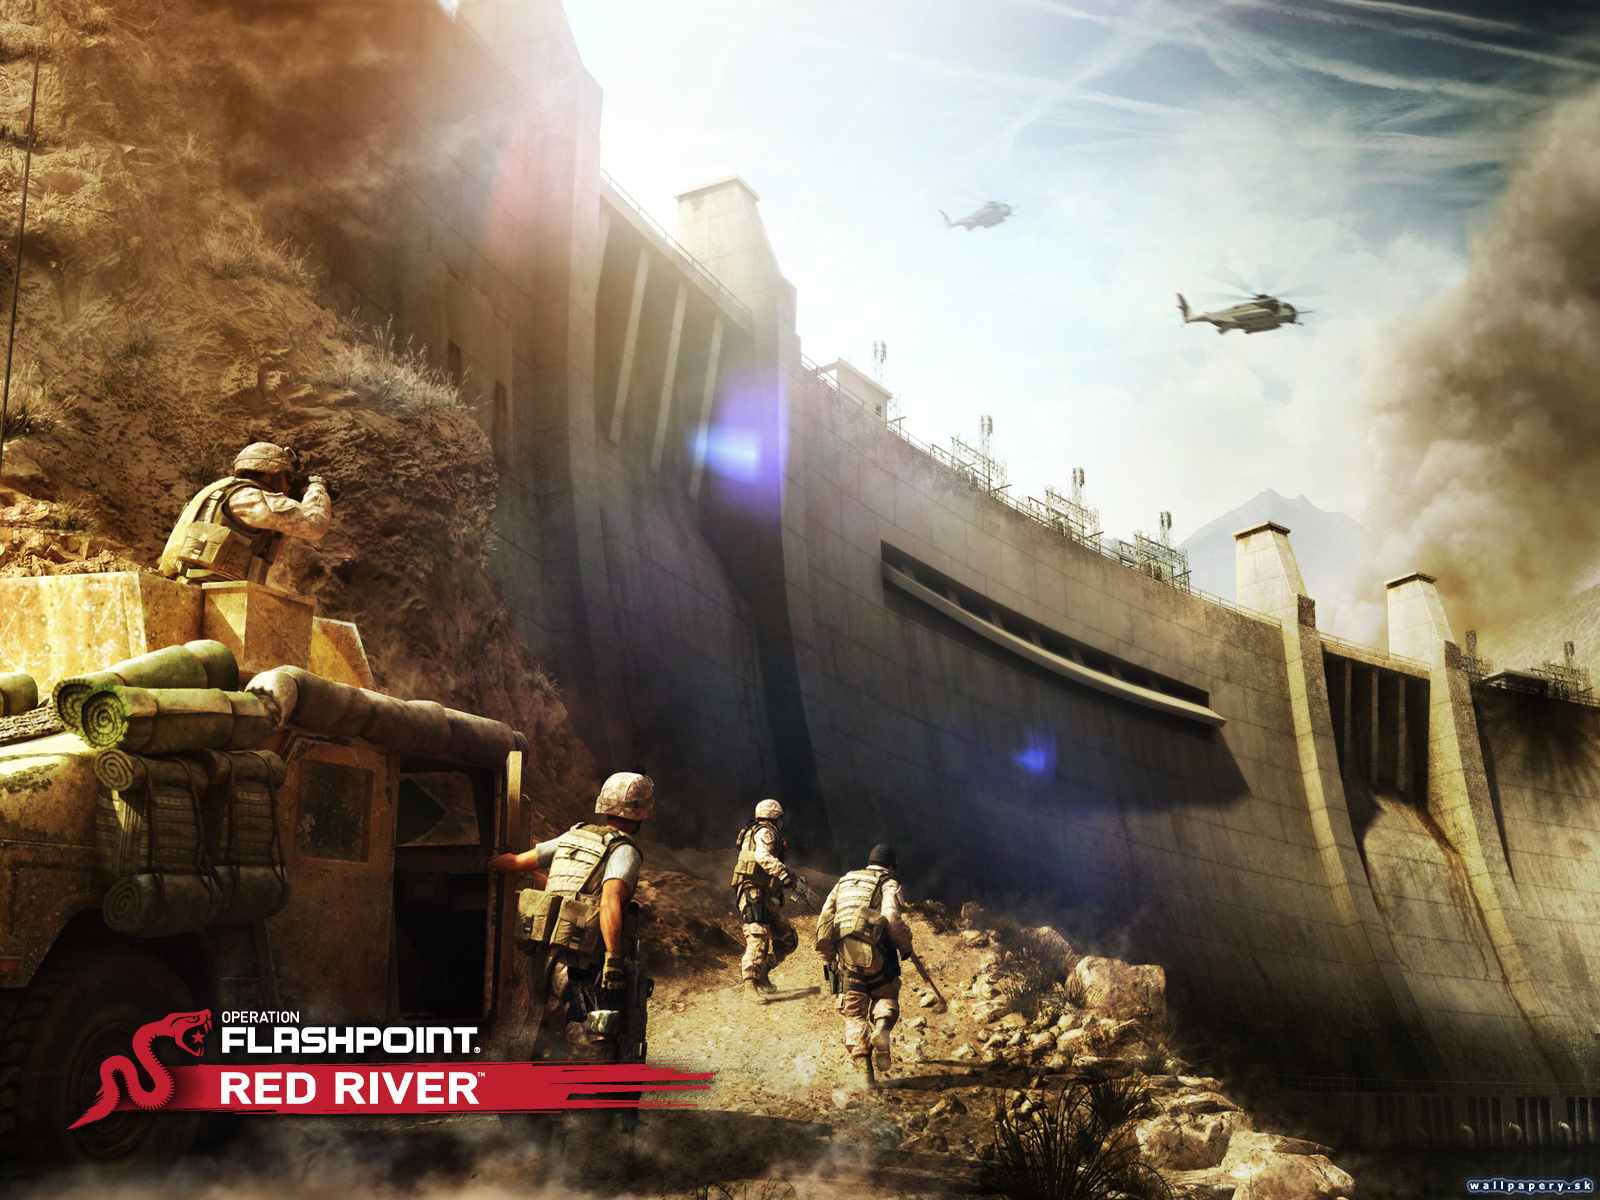 Operation Flashpoint: Red River - wallpaper 5